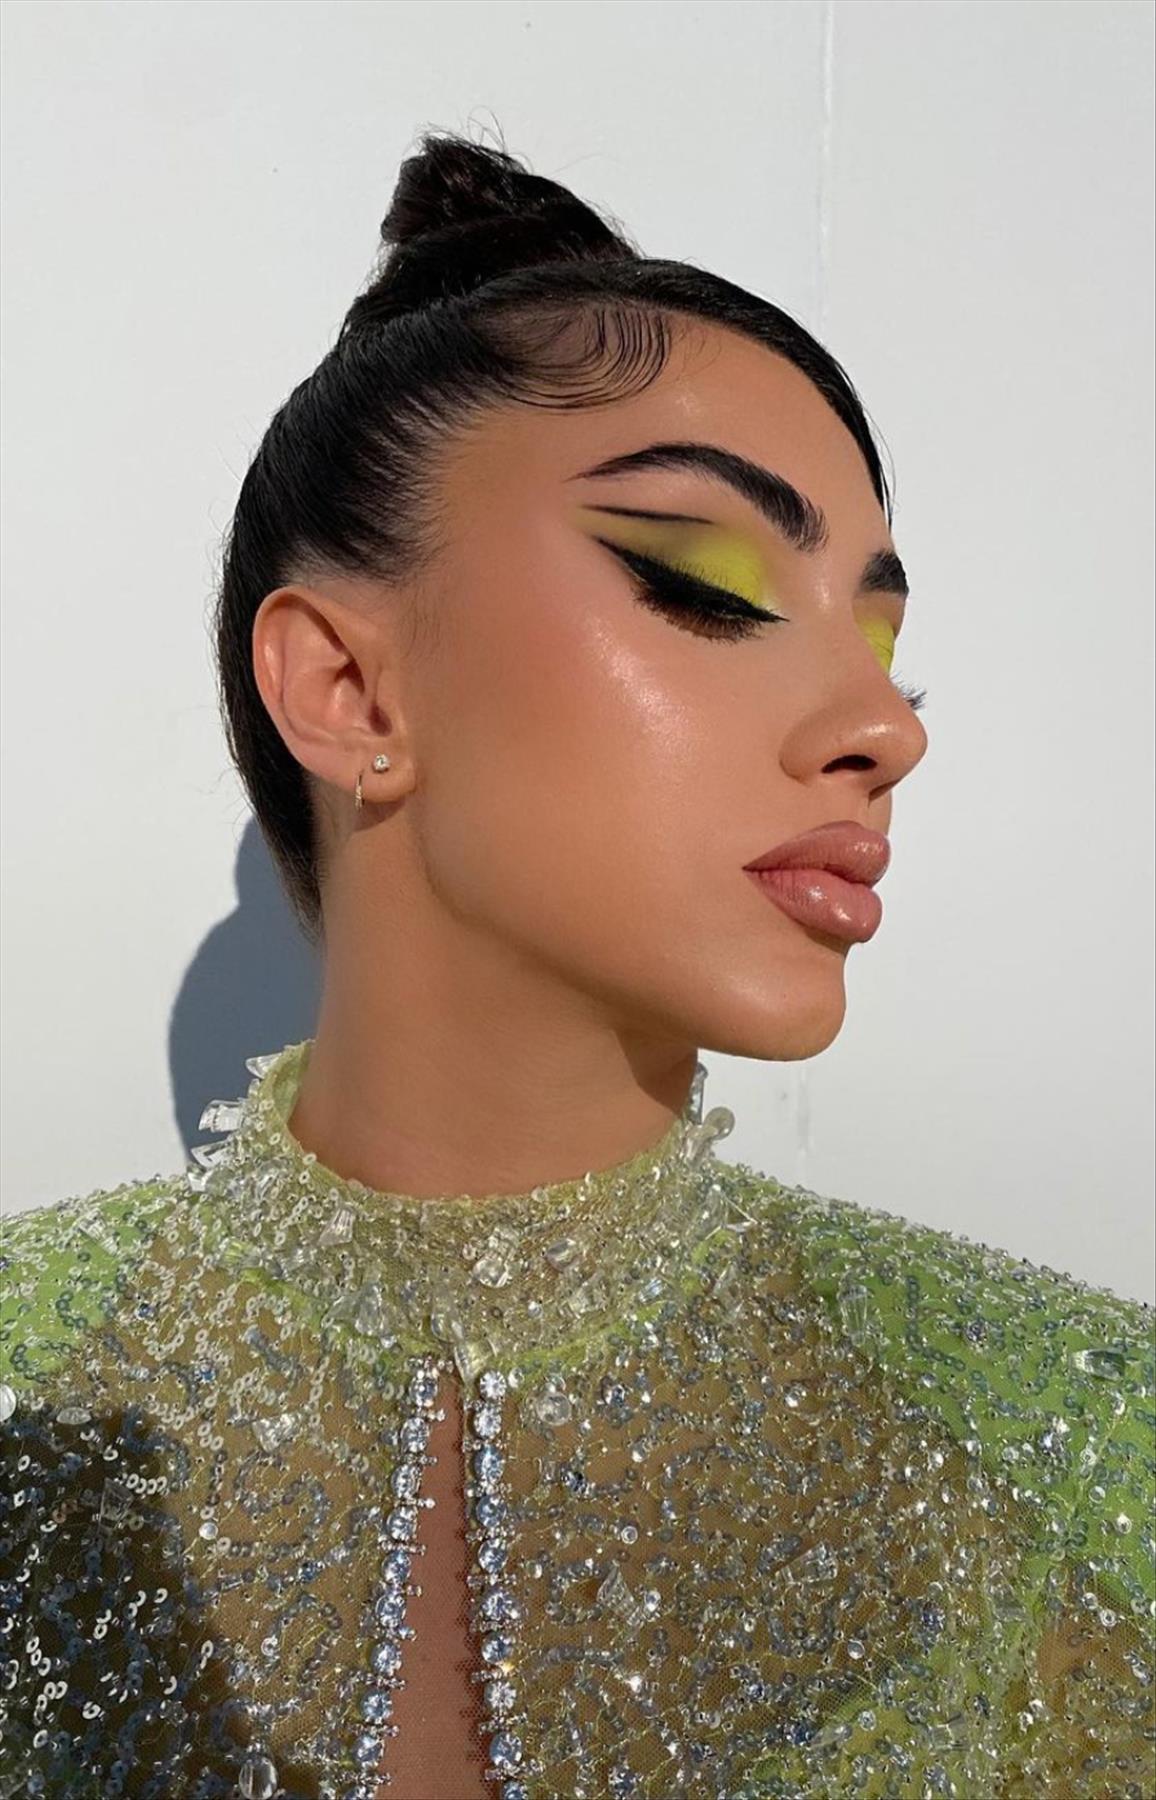 How to Rock the Green Eye Makeup Looks & Trend?